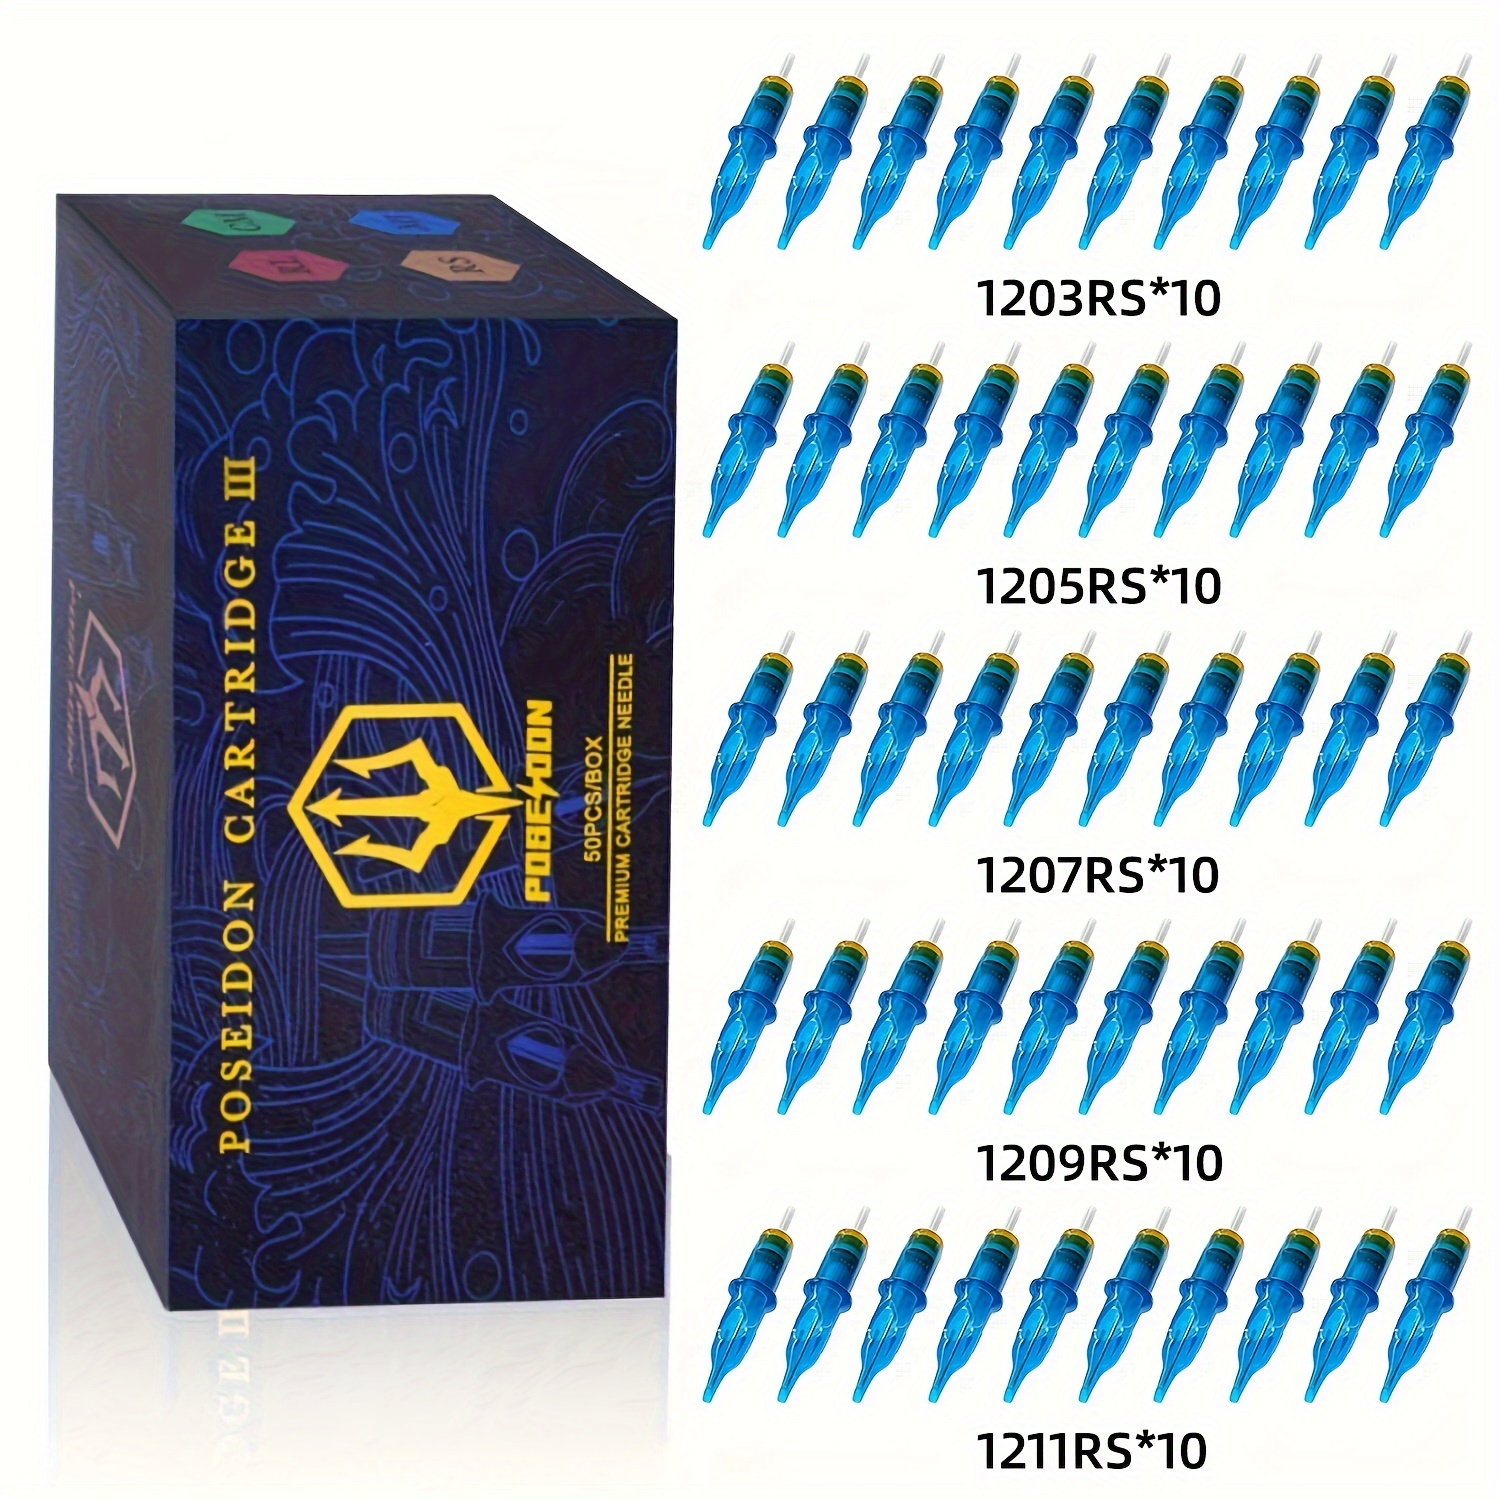 

Tattoo Cartridge Needles, Sterilized Safety Cartridges With Membrane -1203rs, 1205rs, 1207rs, 1209rs, 1211rs For Professional Tattoo Artists